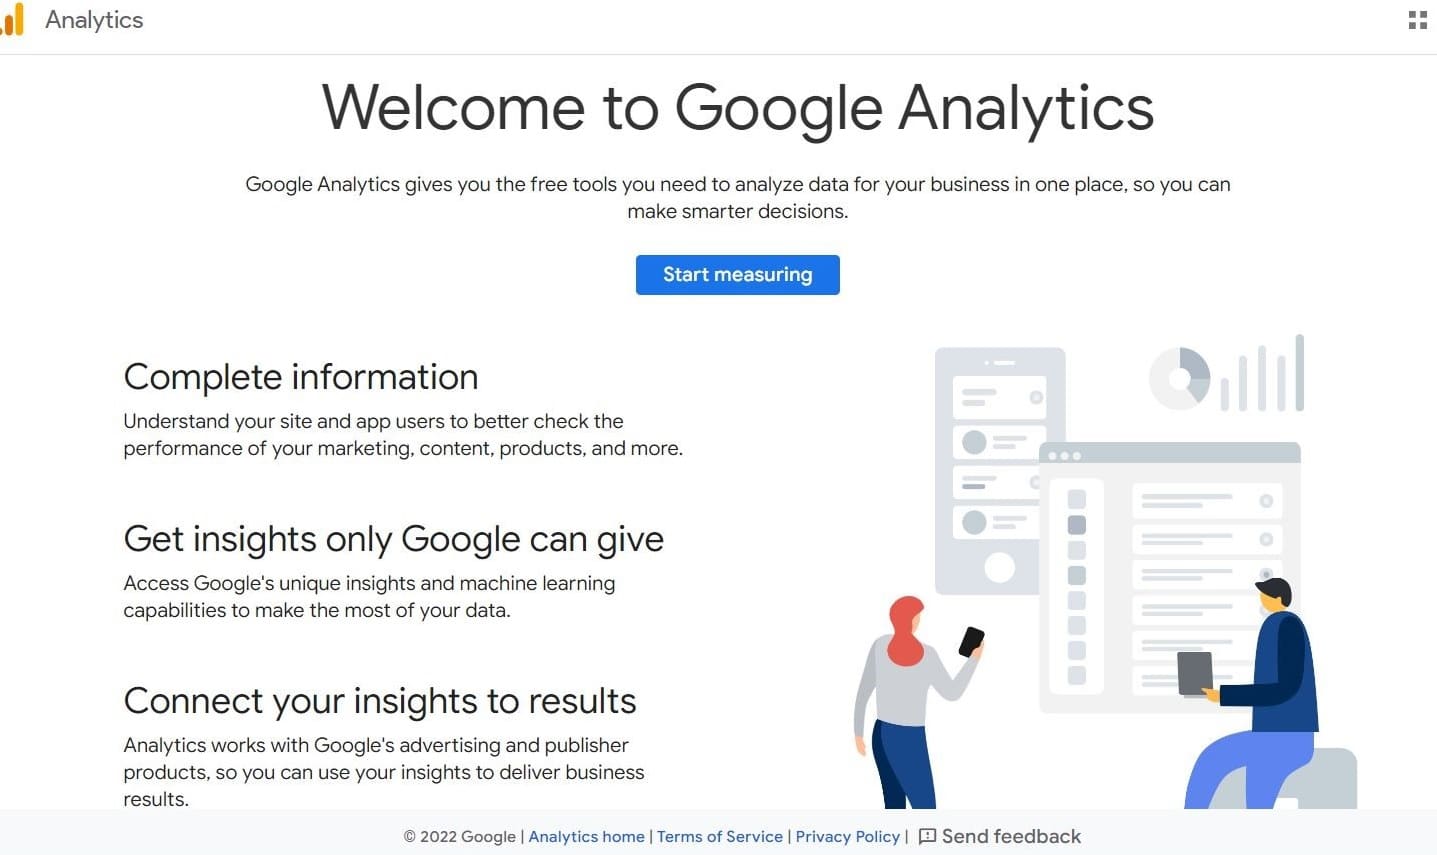 The Google Analytics homepage with the categories 